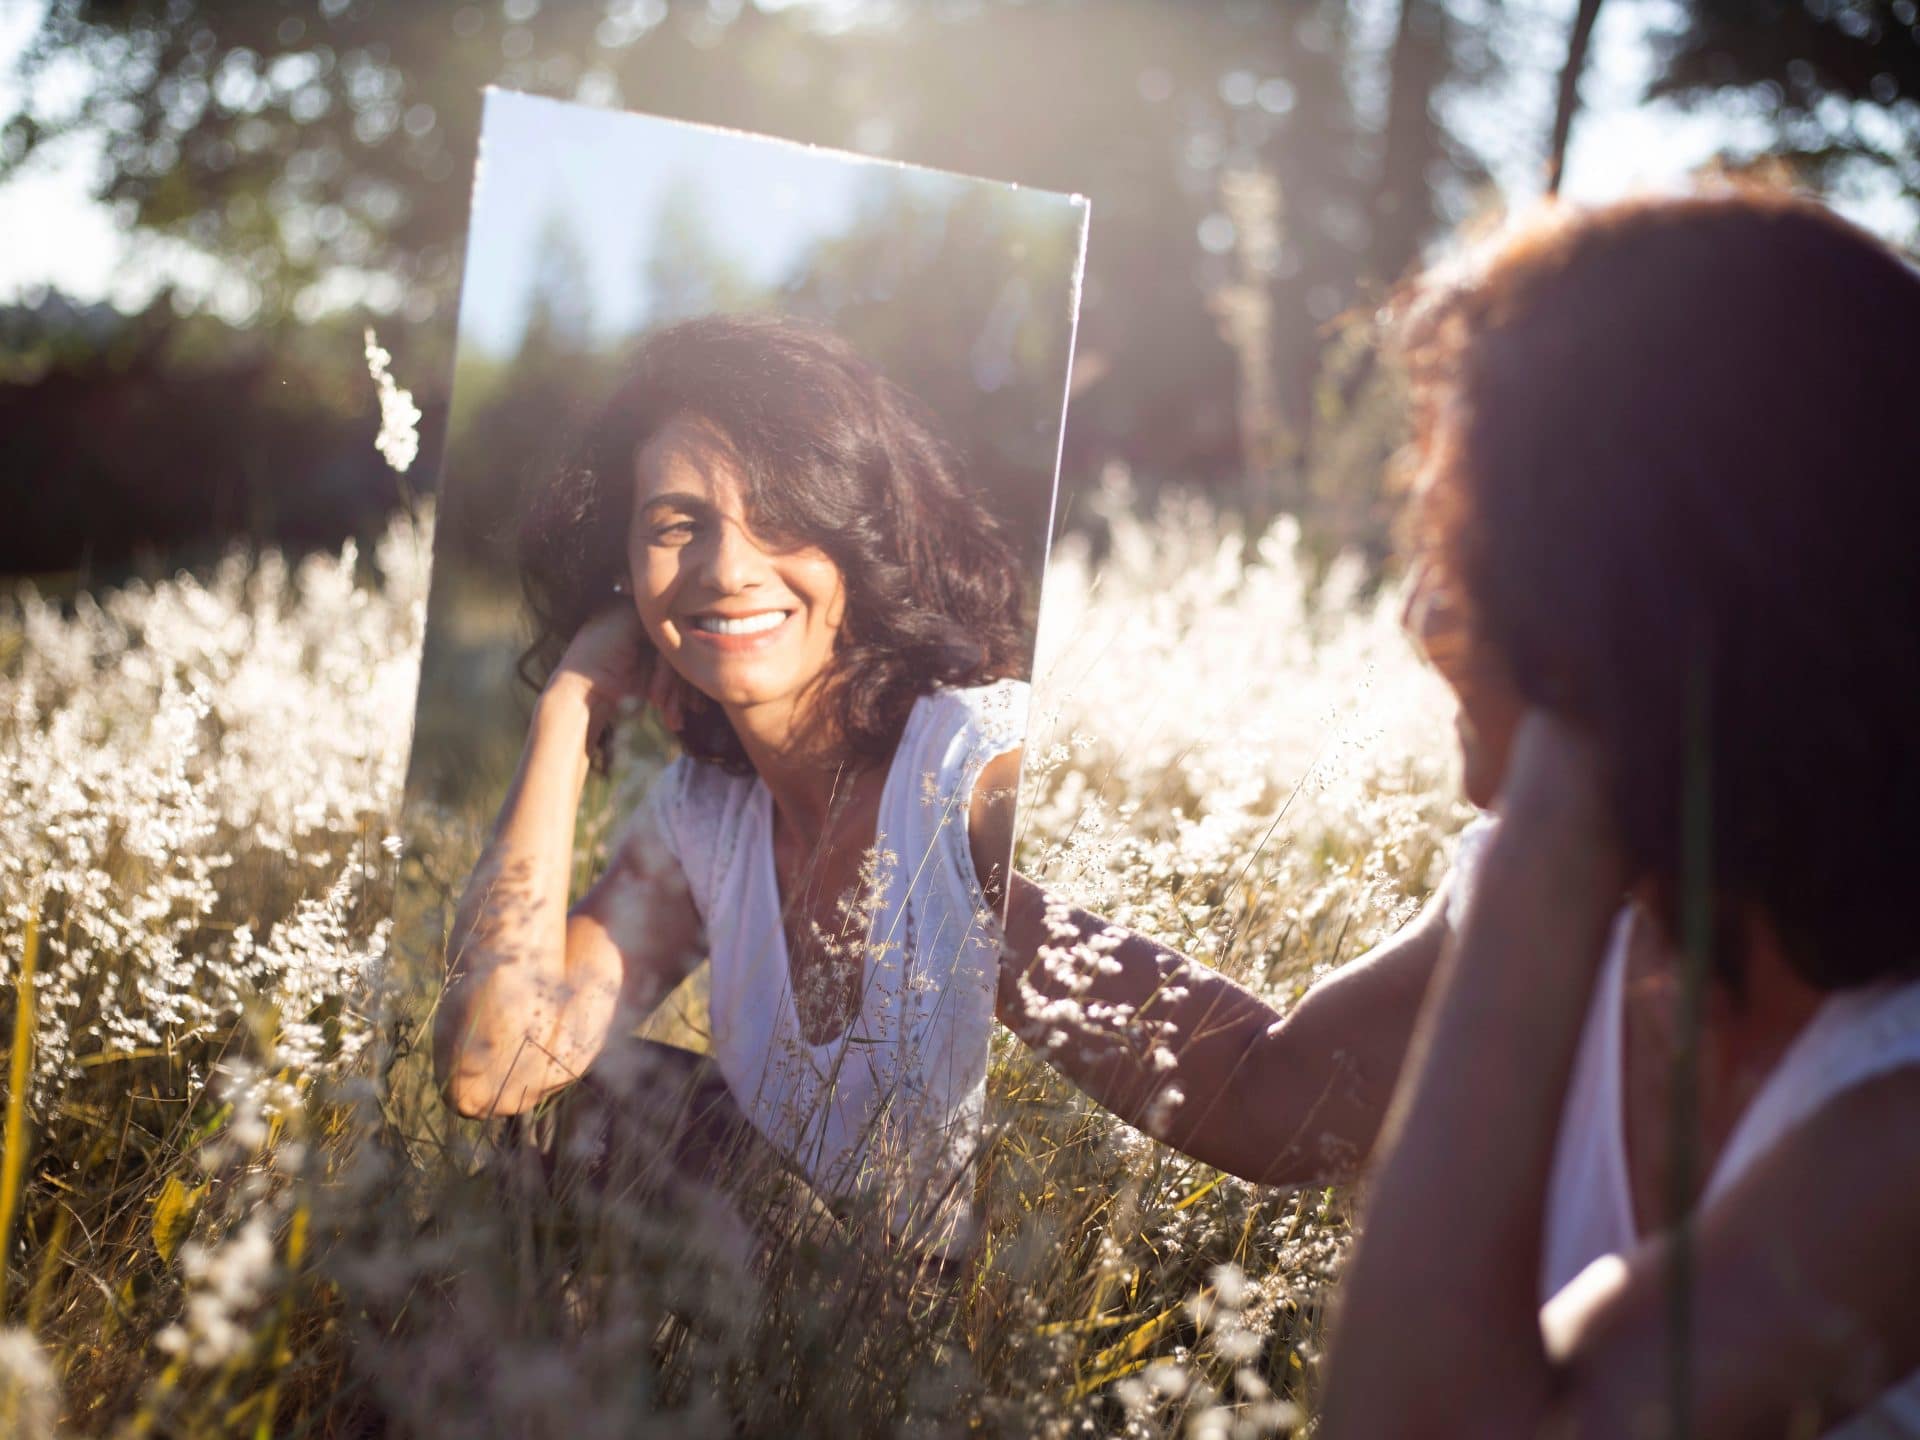 A happy woman outdoors, smiling in a mirror